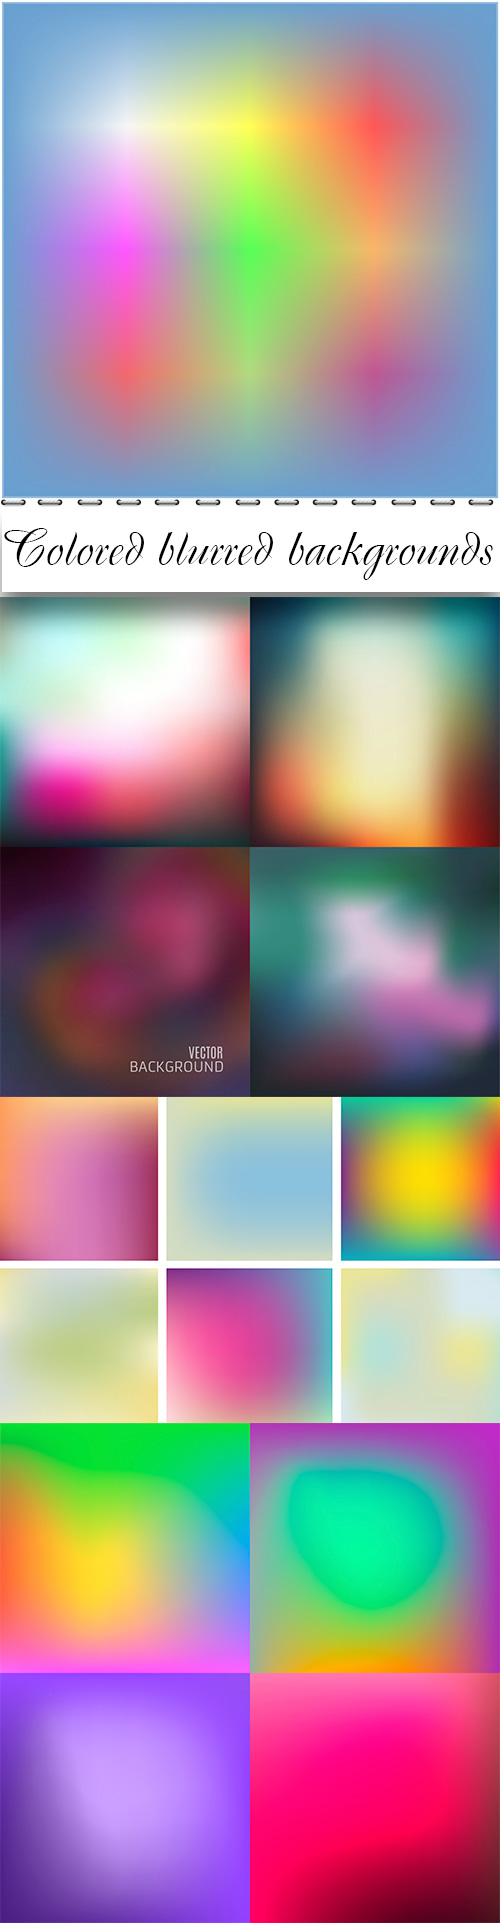 Colored blurred vector backgrounds